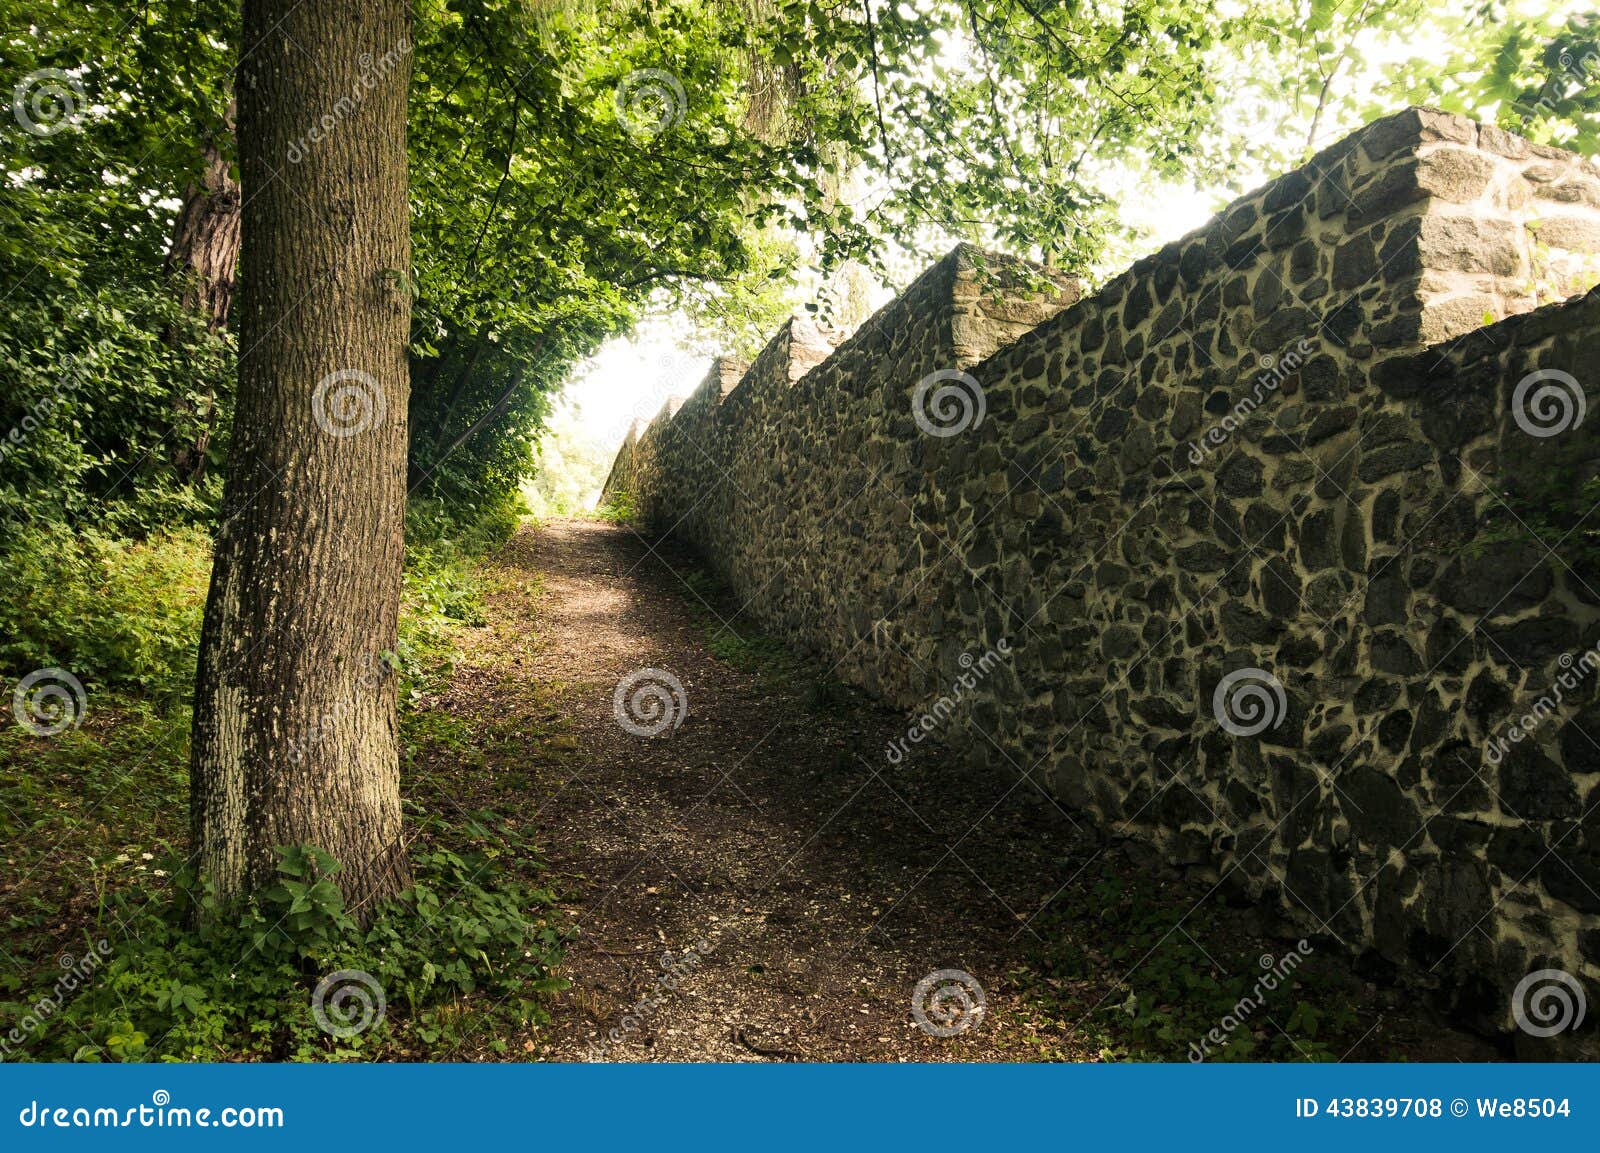 old stone wall bordering the park